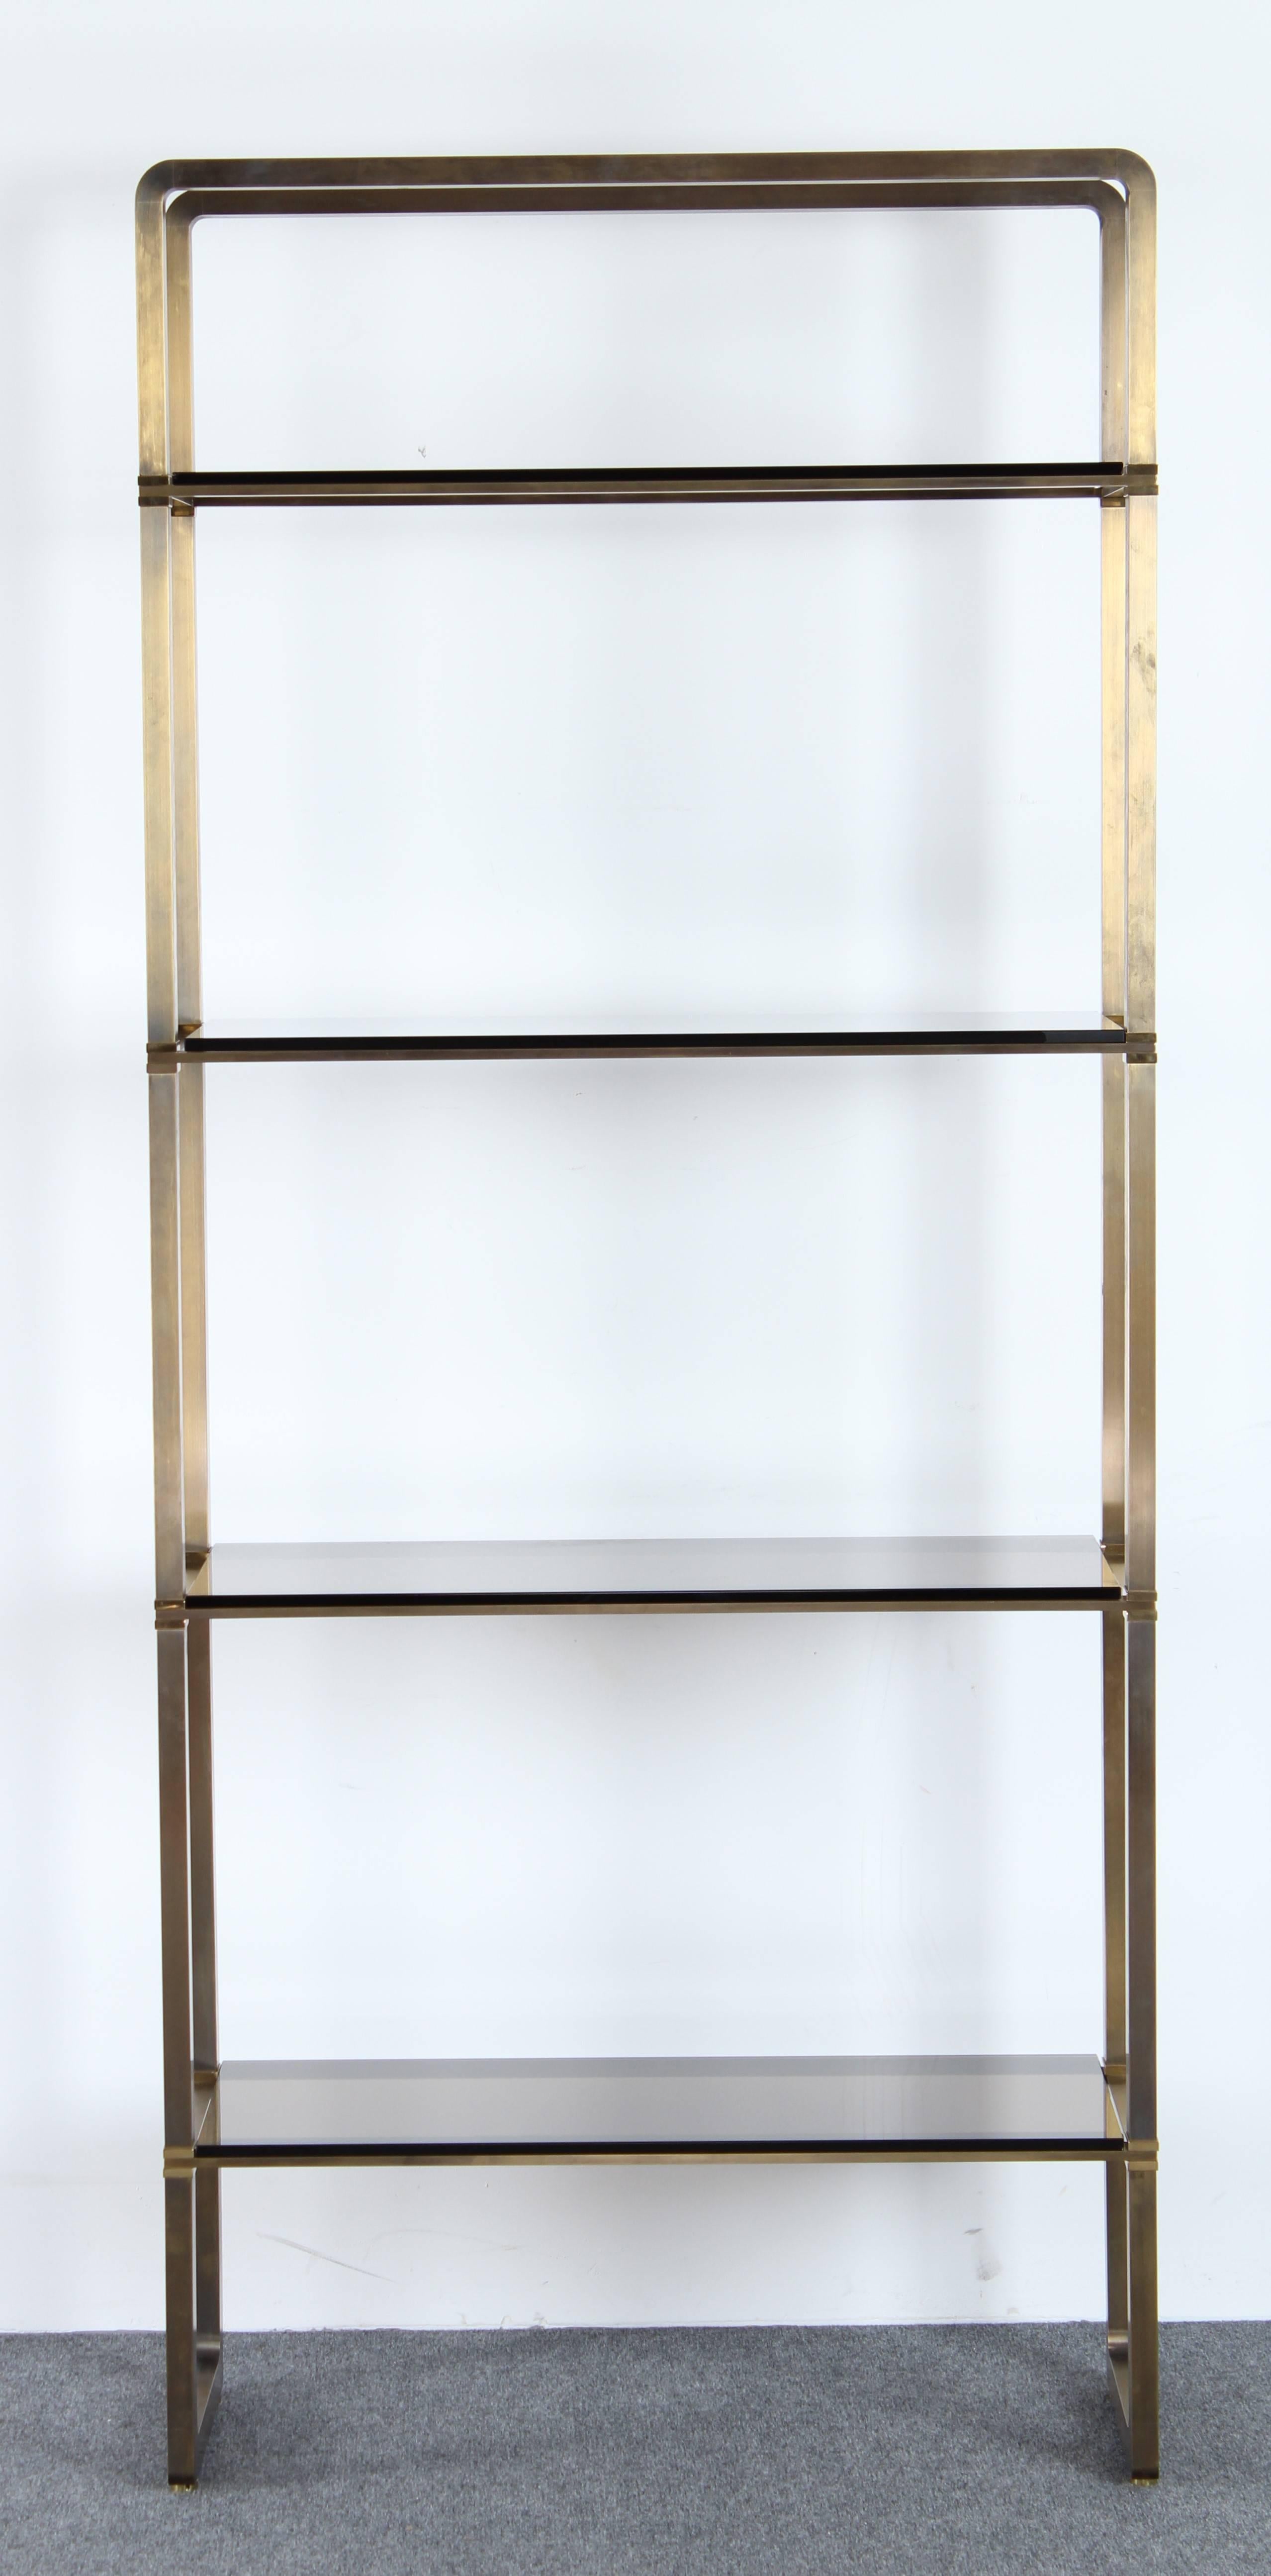 A fabulous Paul M. Jones bronze and glass four-tiered etagere or display shelf with four smoked glass shelves. Solid bronze and brass frame. Versatile and modern. Very good condition with age appropriate wear. Two shelves have minor chips, as shown